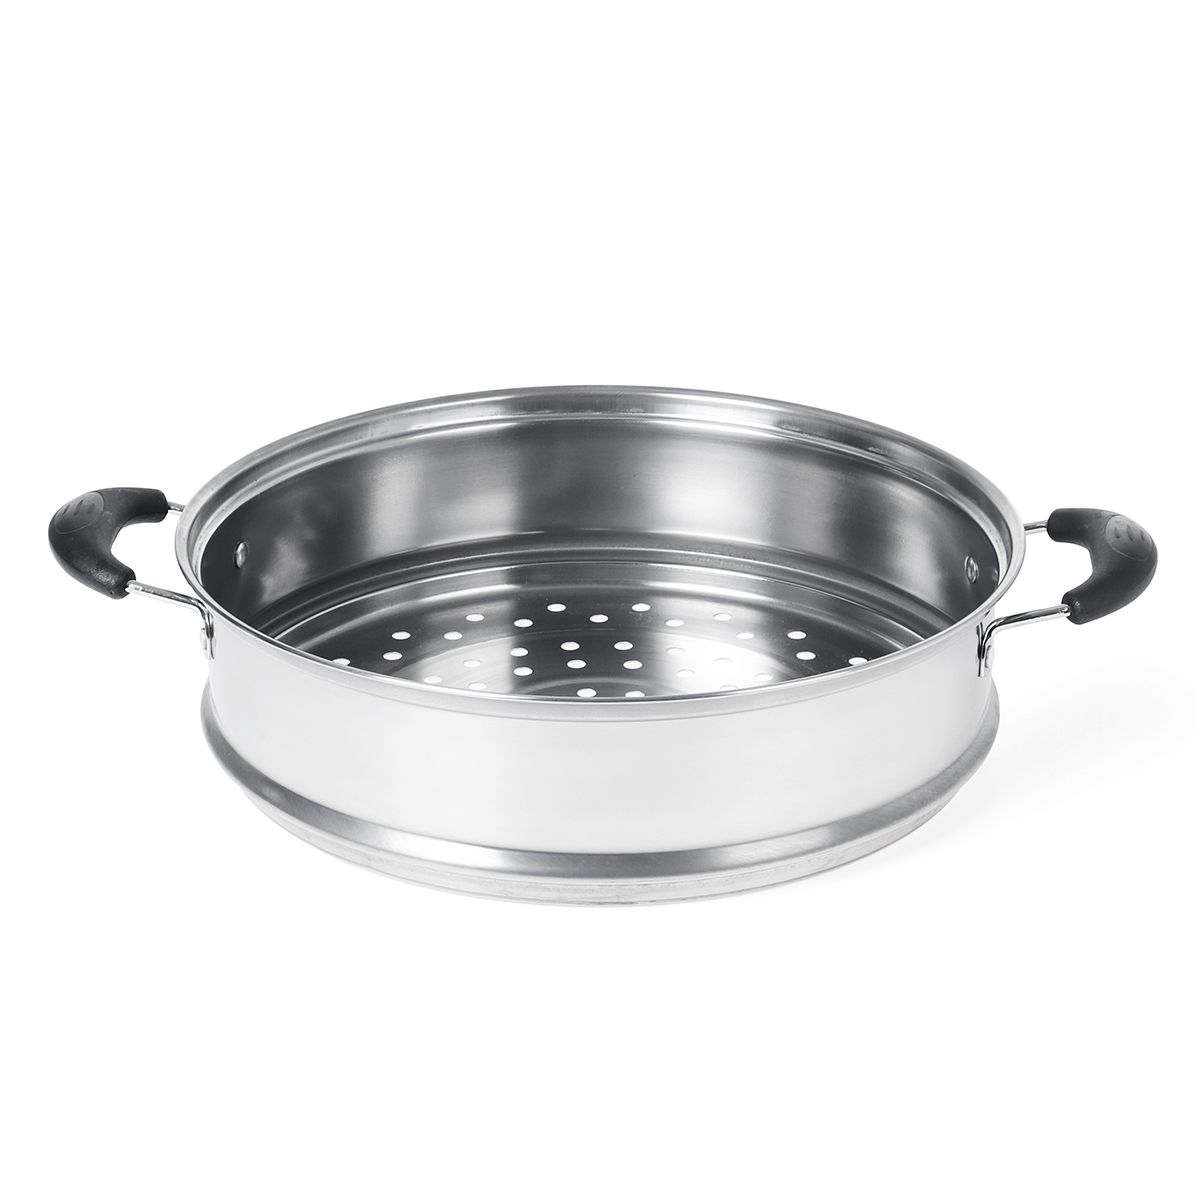 Stainless-Steel-3-Layer-Boiler-And-Steamer-Thickened-Double-Pot-Stainless-Steel-Pot-1722927